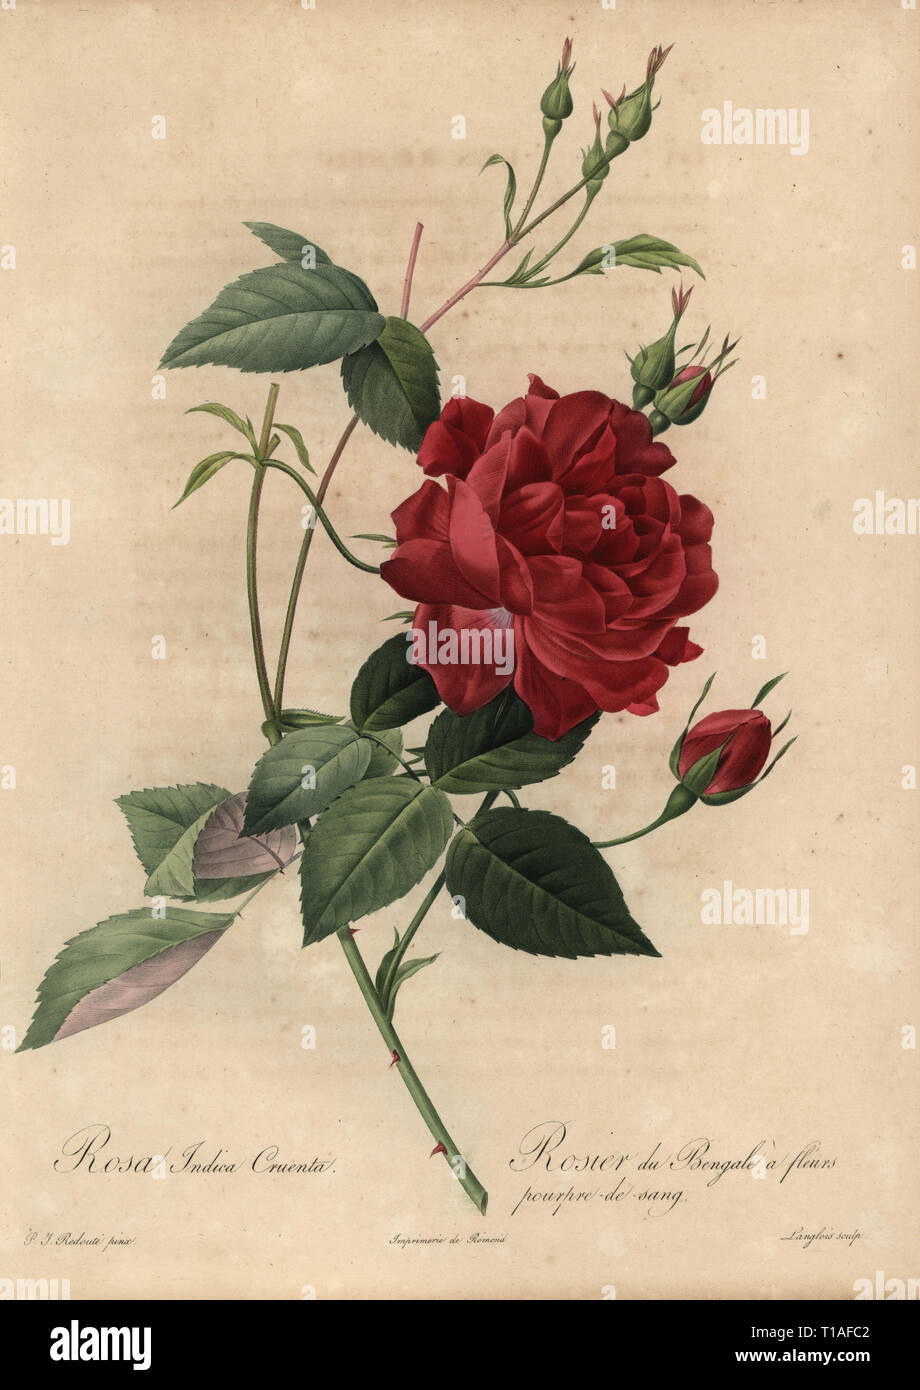 Crimson China rose, Rosa chinensis. Rosa indica cruenta, Rosier du Bengale a fleurs. Stipple copperplate engraving by Pierre Gabriel Langlois handcoloured a la poupee after a botanical illustration by Pierre-Joseph Redoute from the first folio edition of Les Roses, Firmin Didot, Paris, 1817. Stock Photo